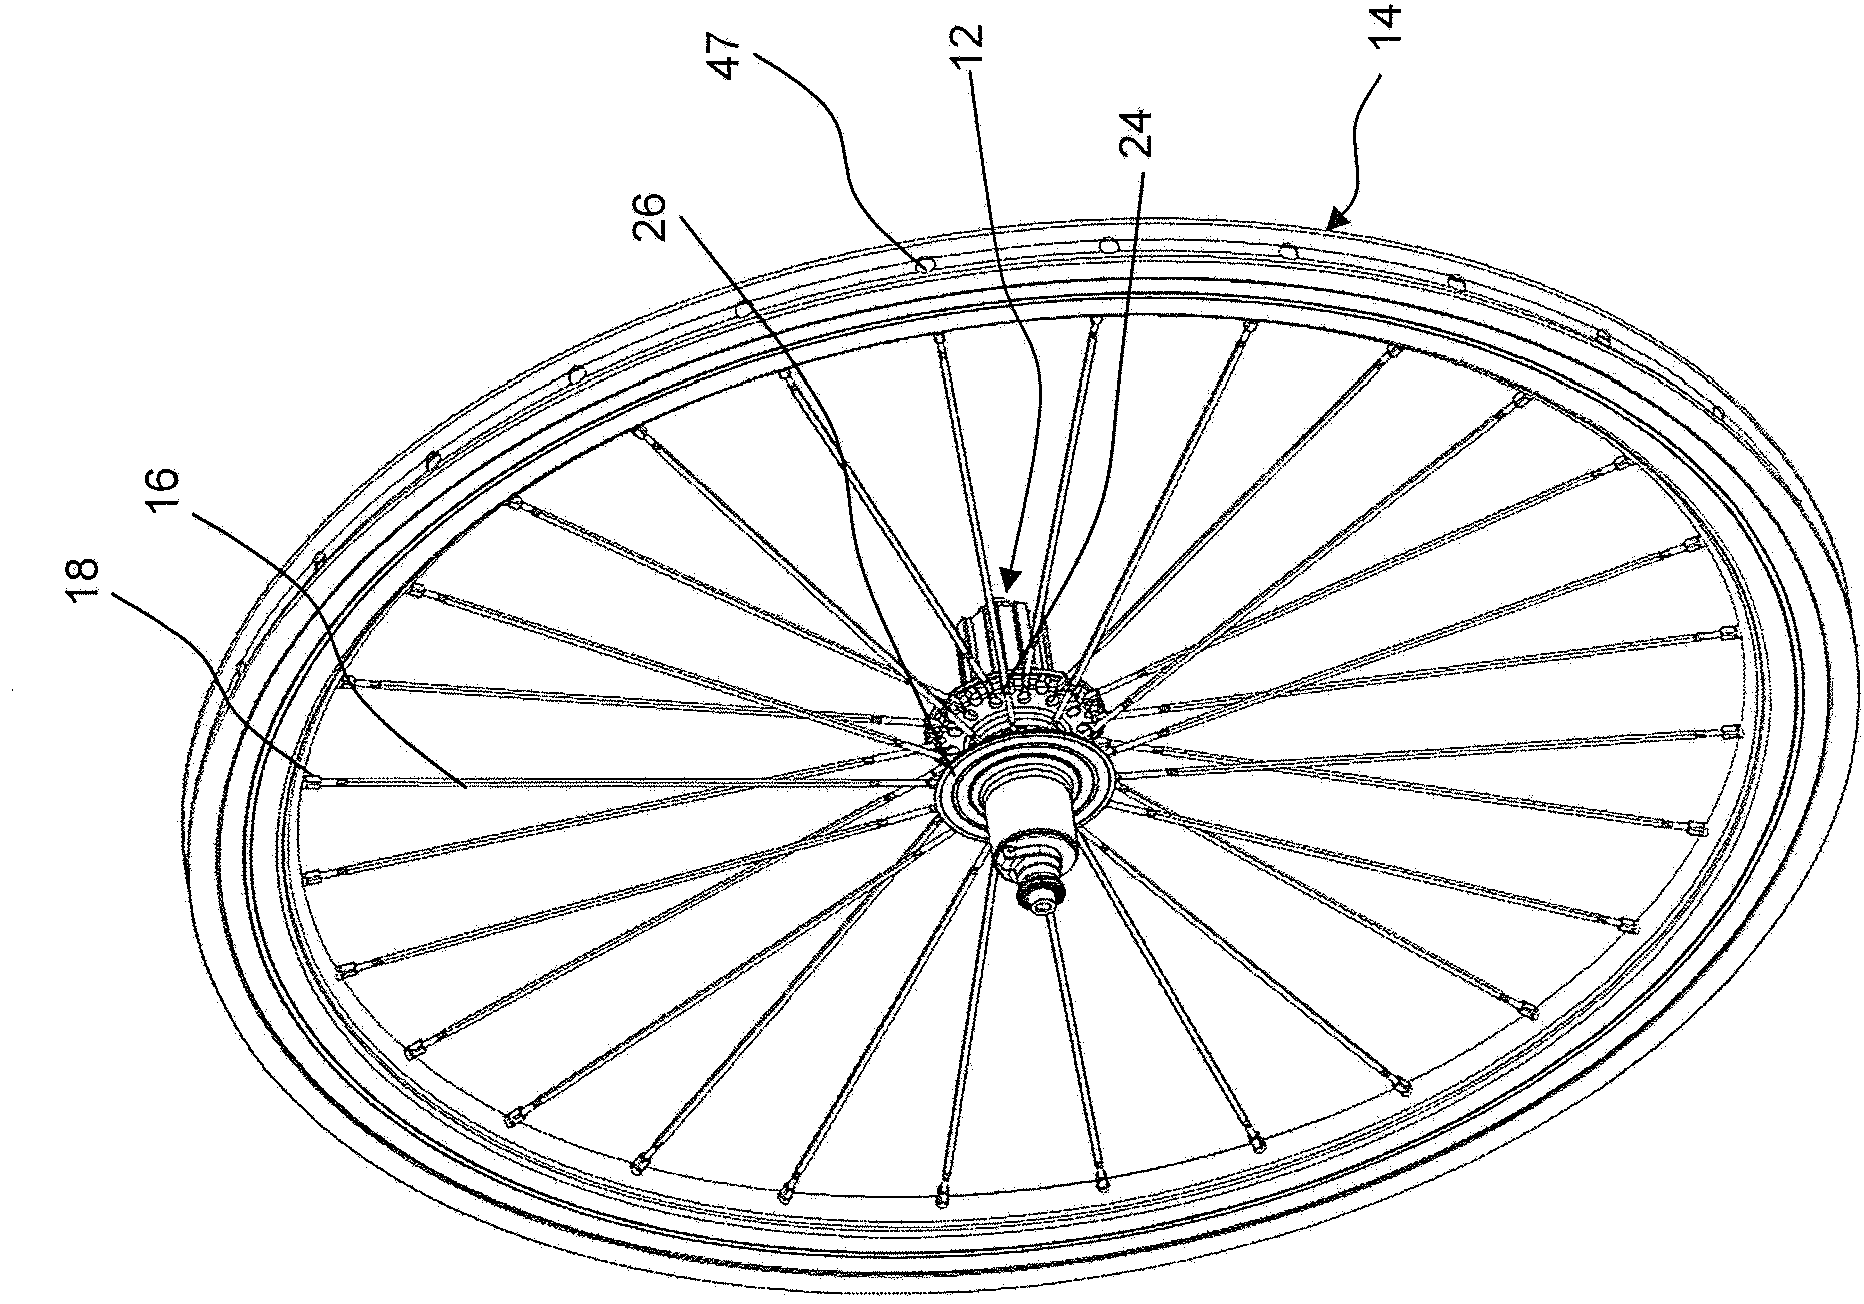 Bicycle wheel and relative manufacturing process